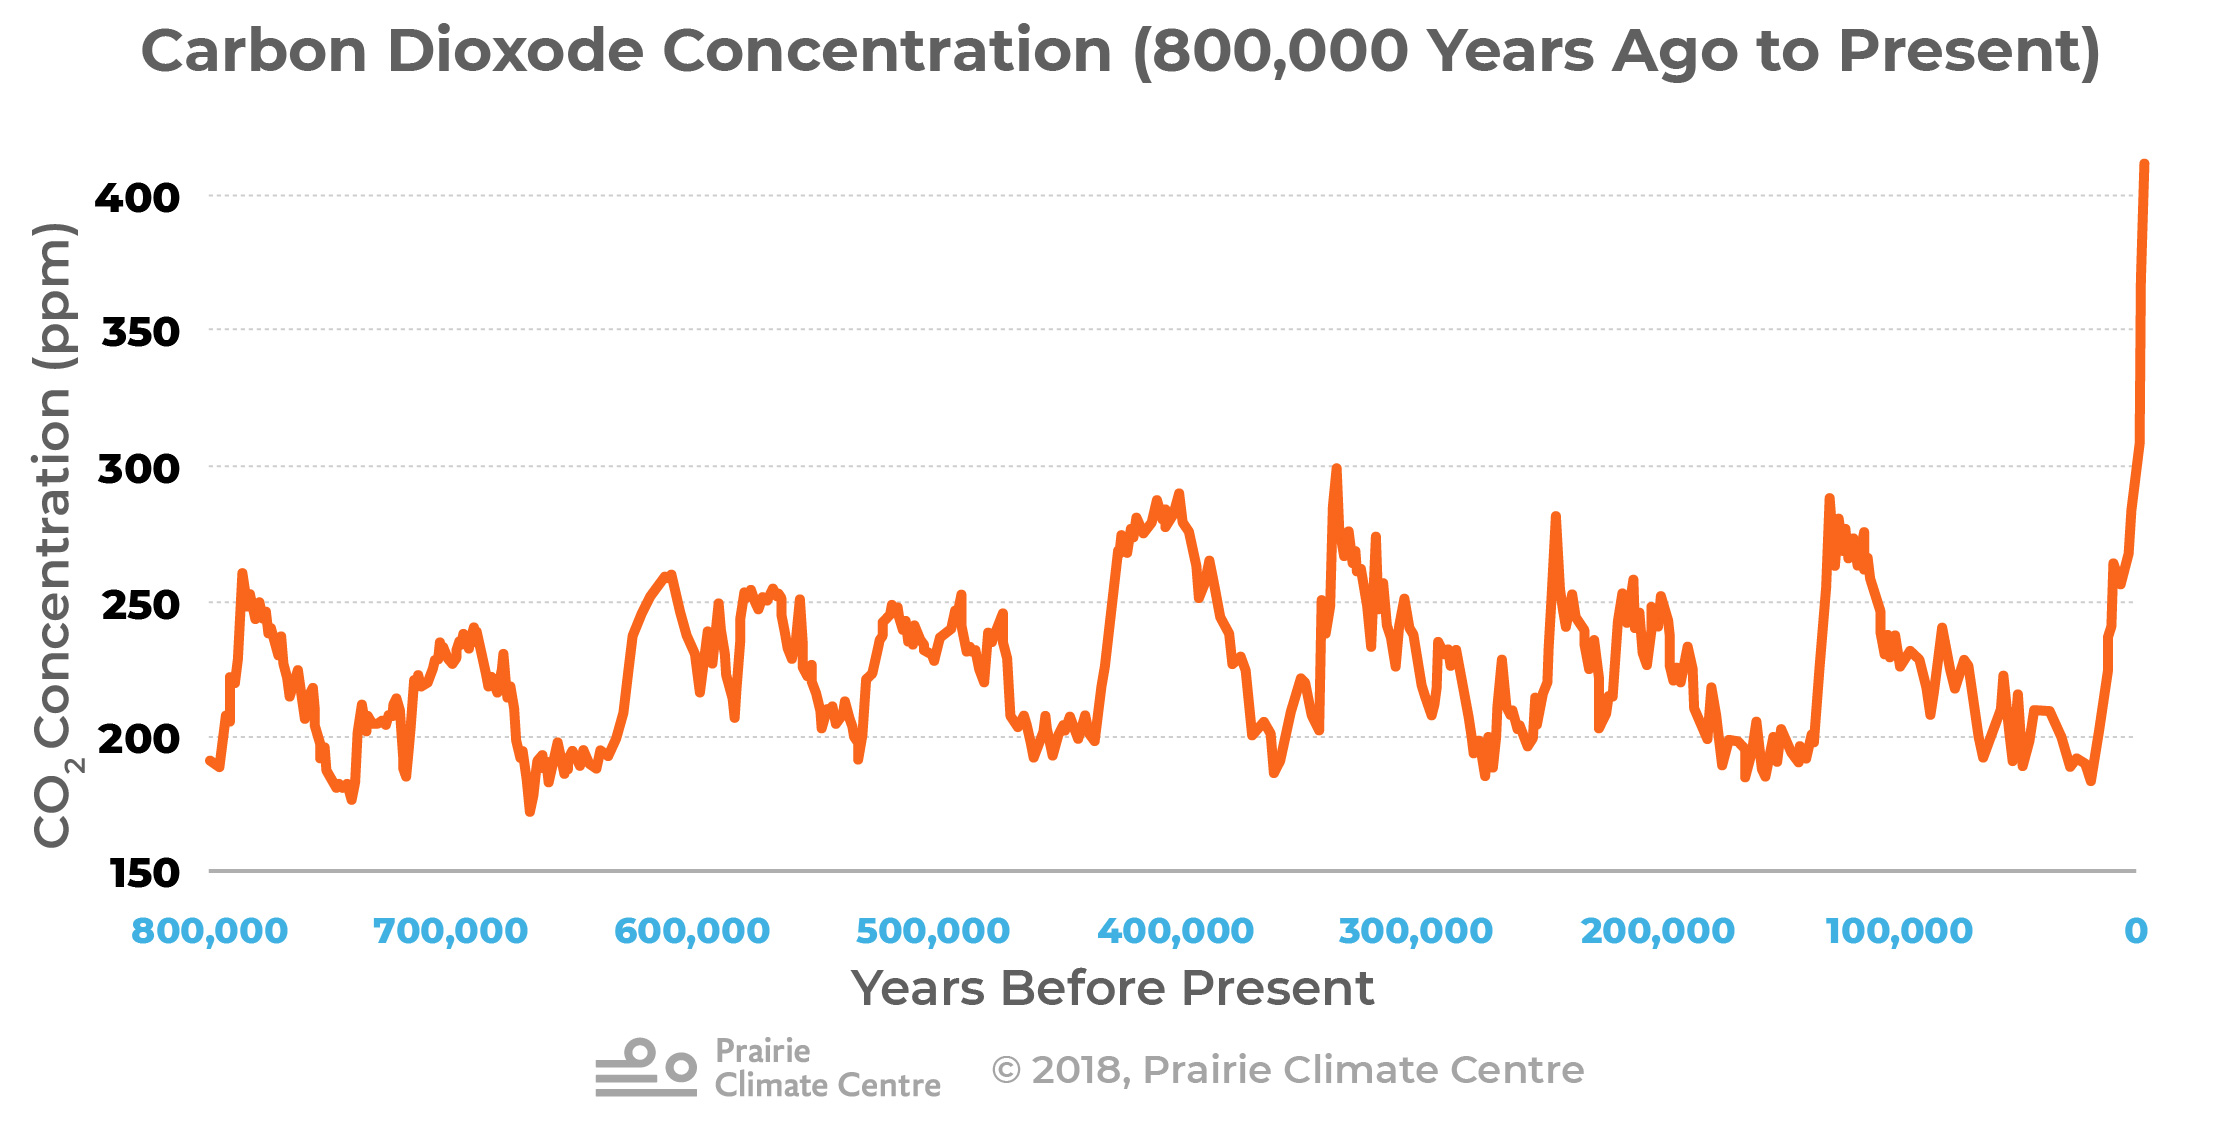 CO2 Concentration over 800,000 years